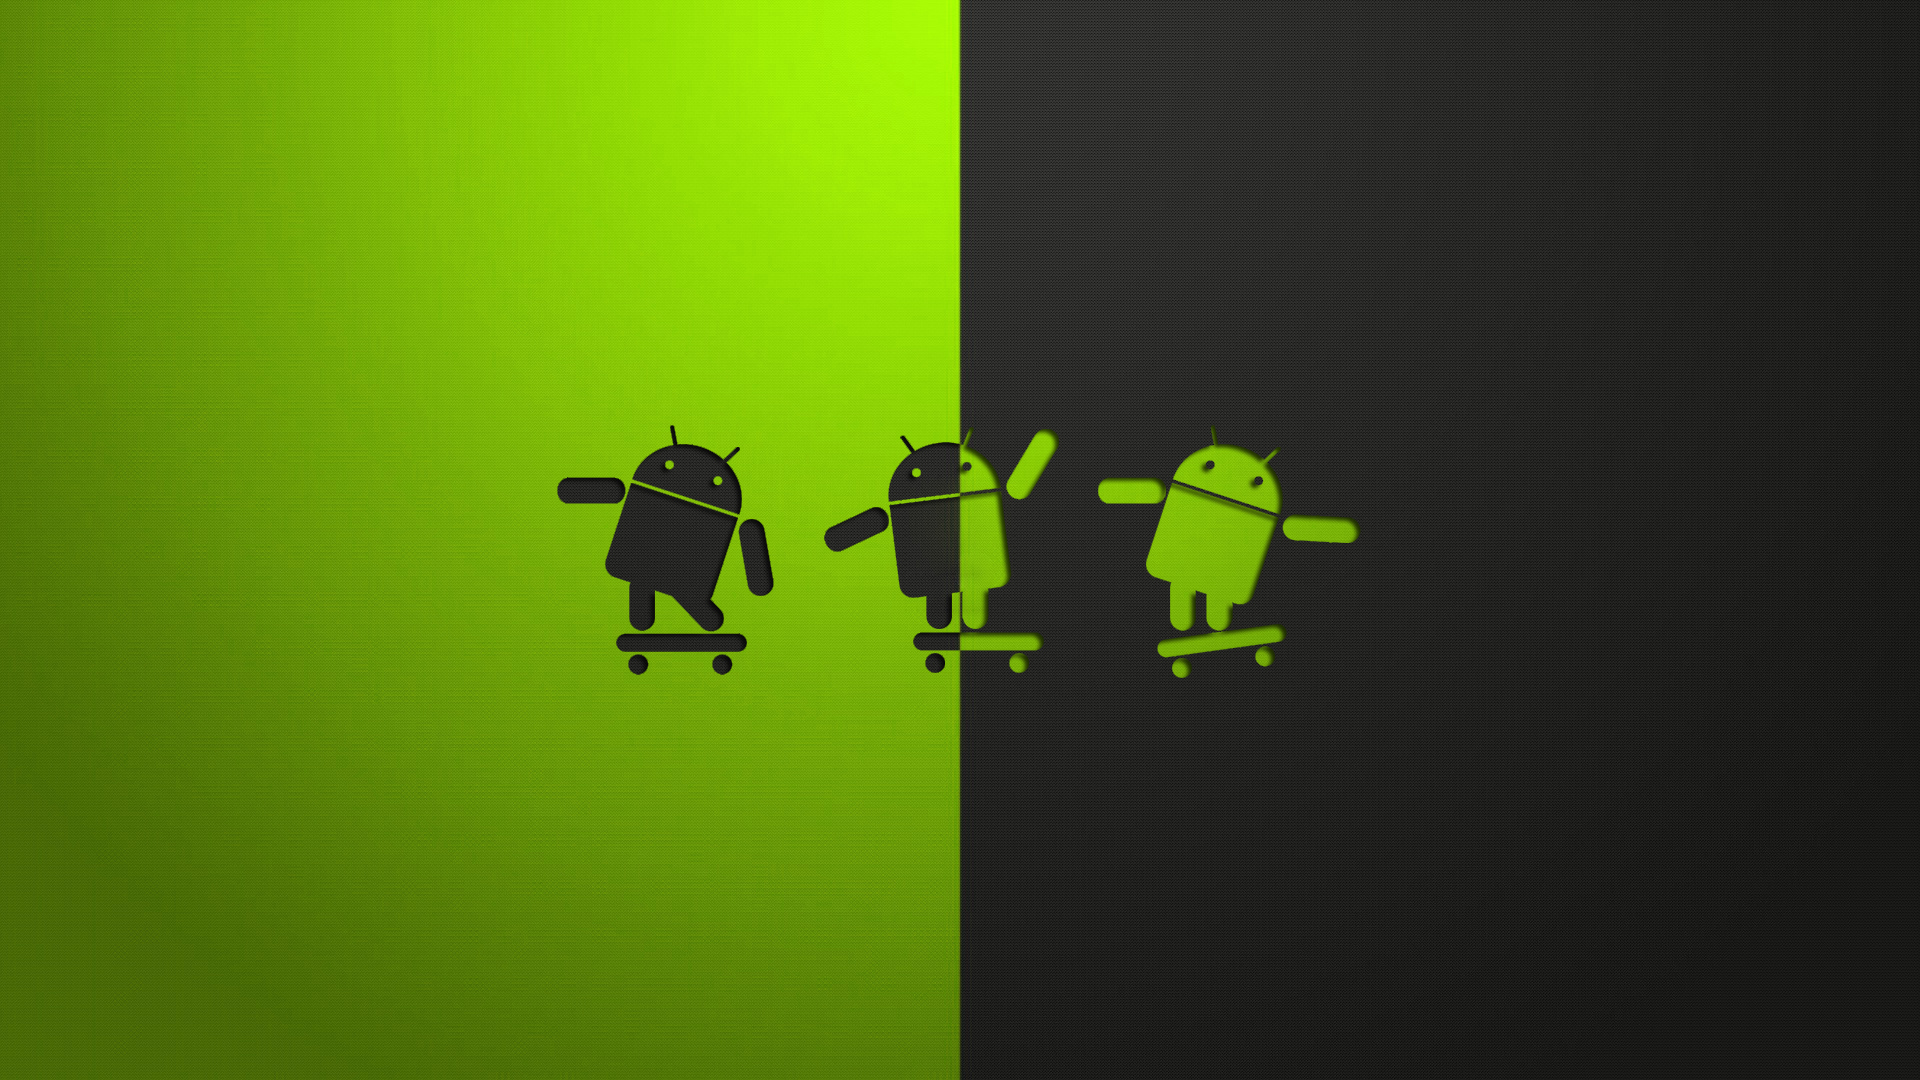 Wallpapers Android - Wallpaper Zone